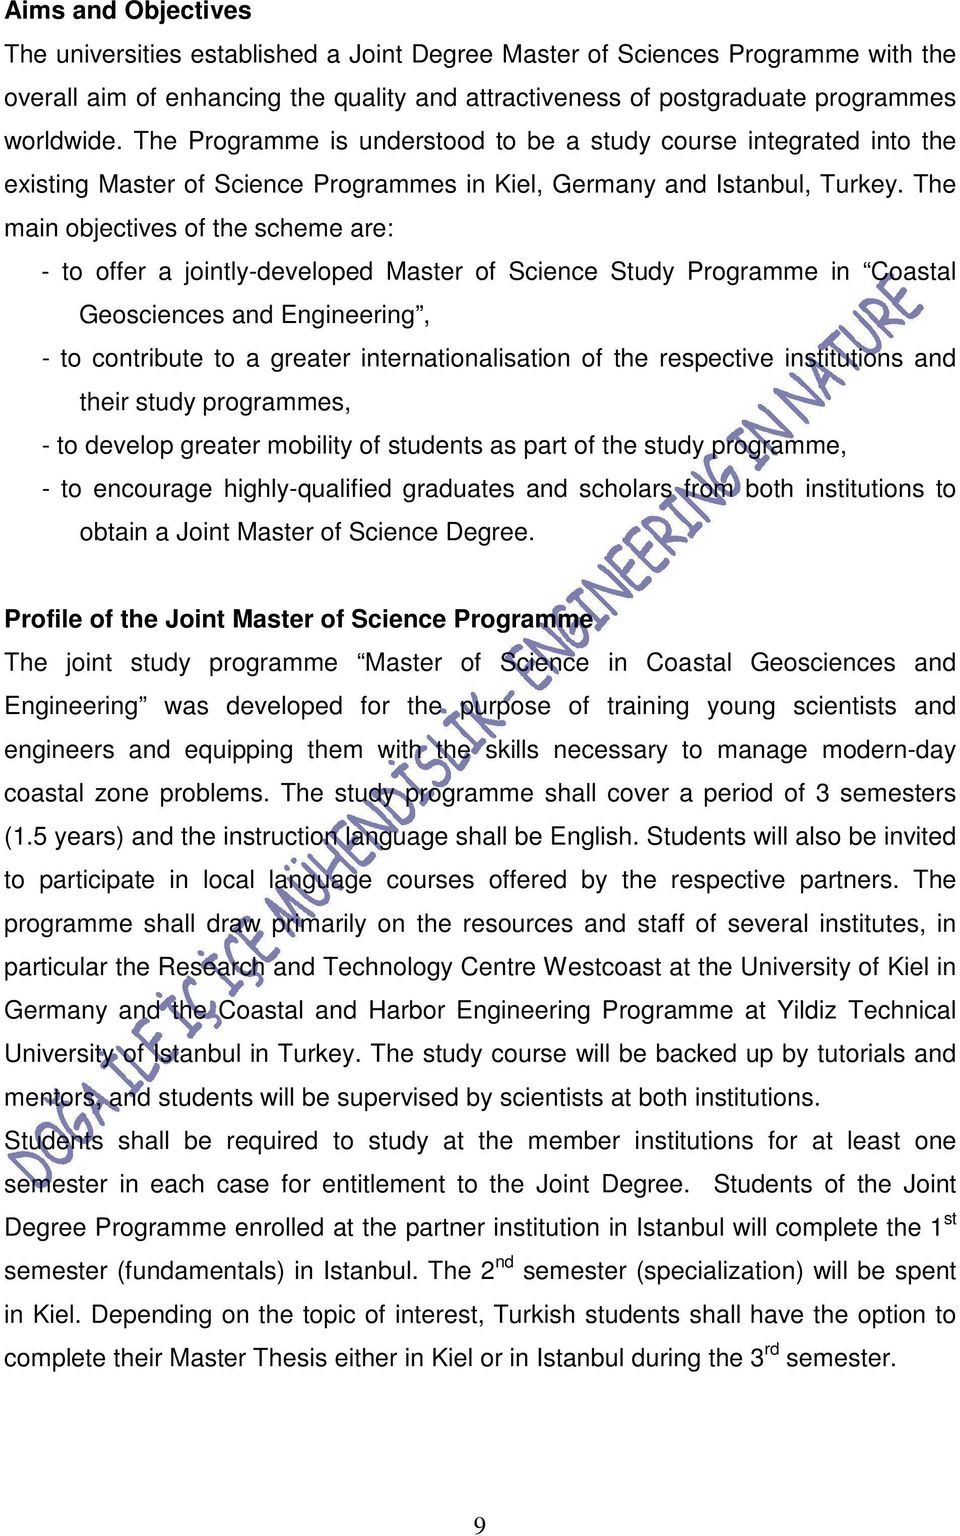 The main objectives of the scheme are: - to offer a jointly-developed Master of Science Study Programme in Coastal Geosciences and Engineering, - to contribute to a greater internationalisation of